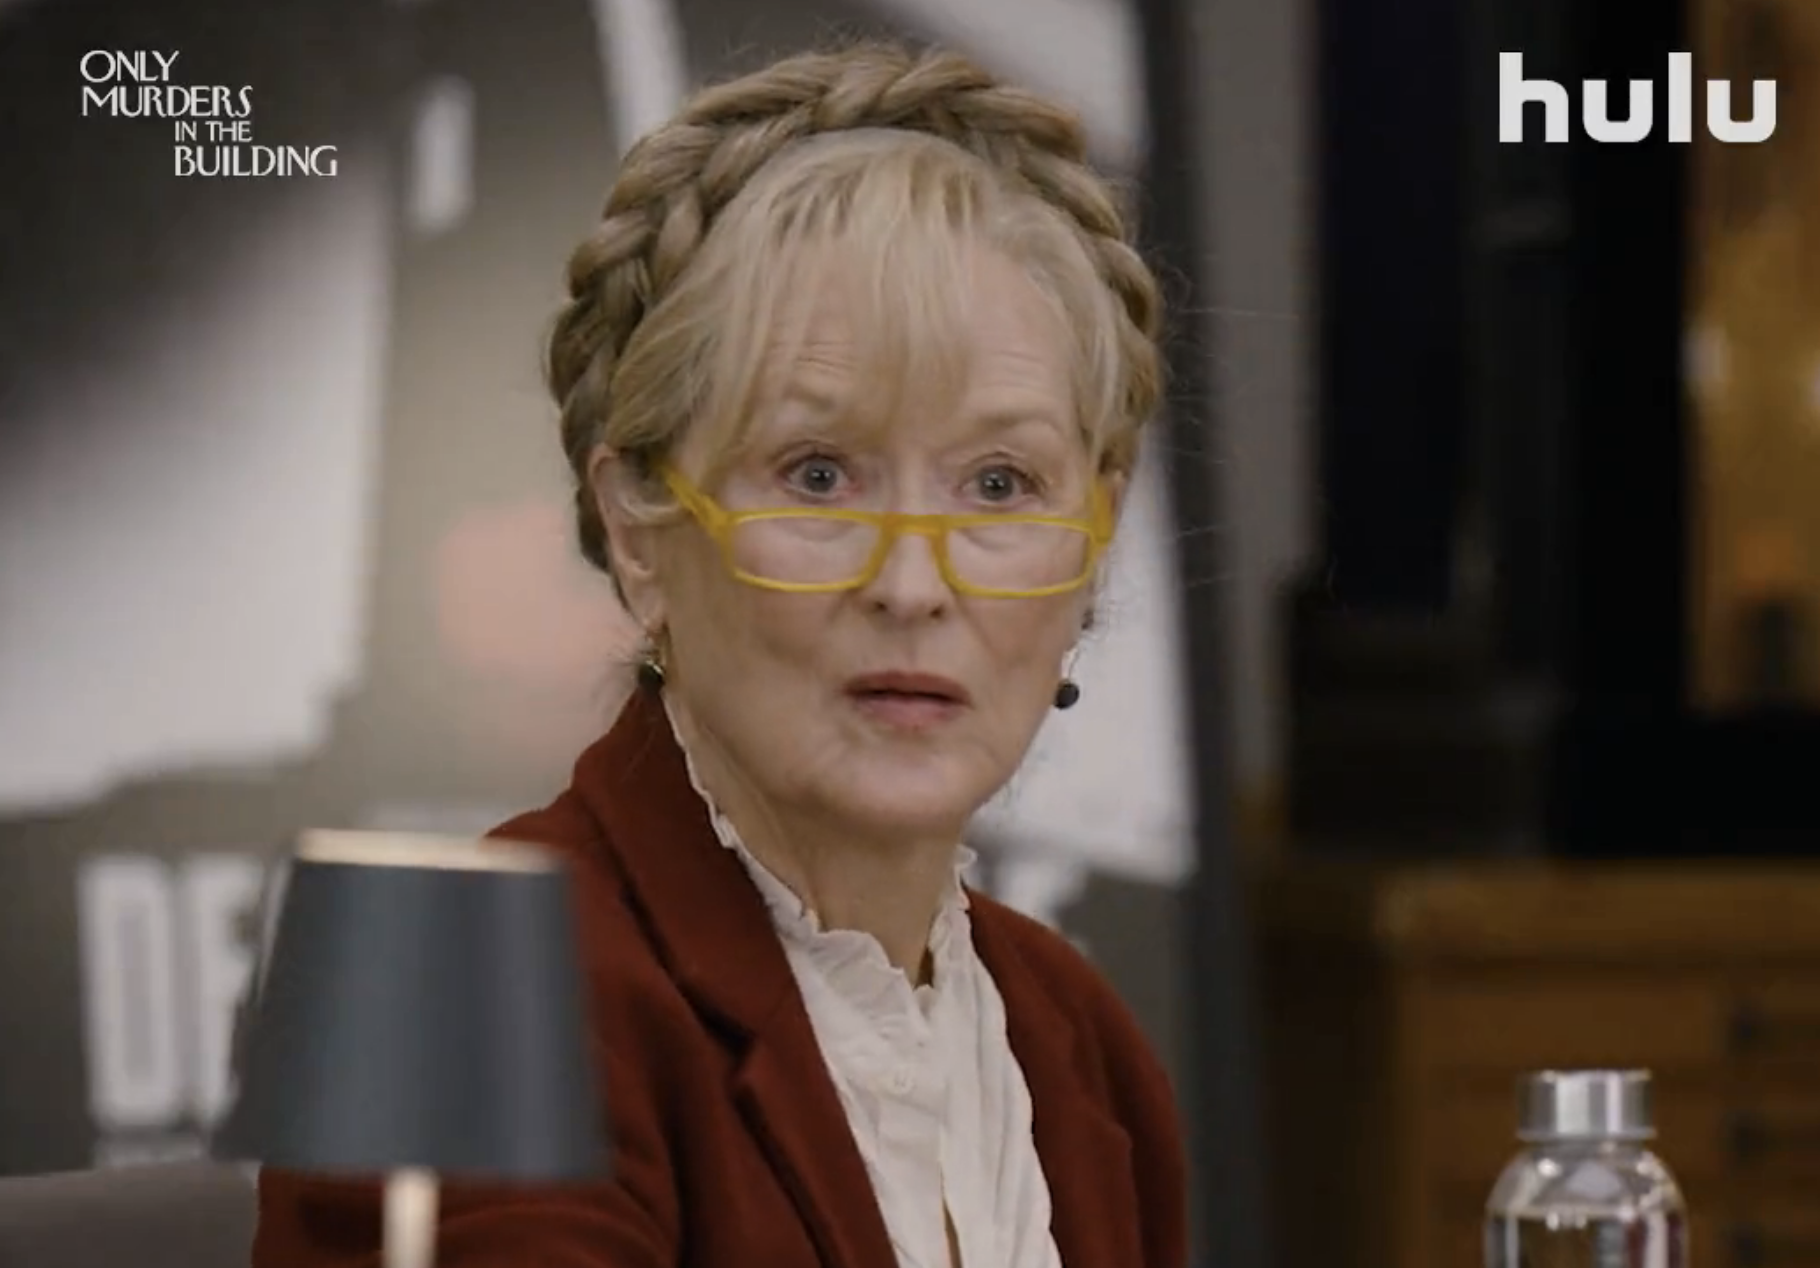 SEE IT: First Look At Meryl Streep In ‘Only Murders In The Building’ Season 3